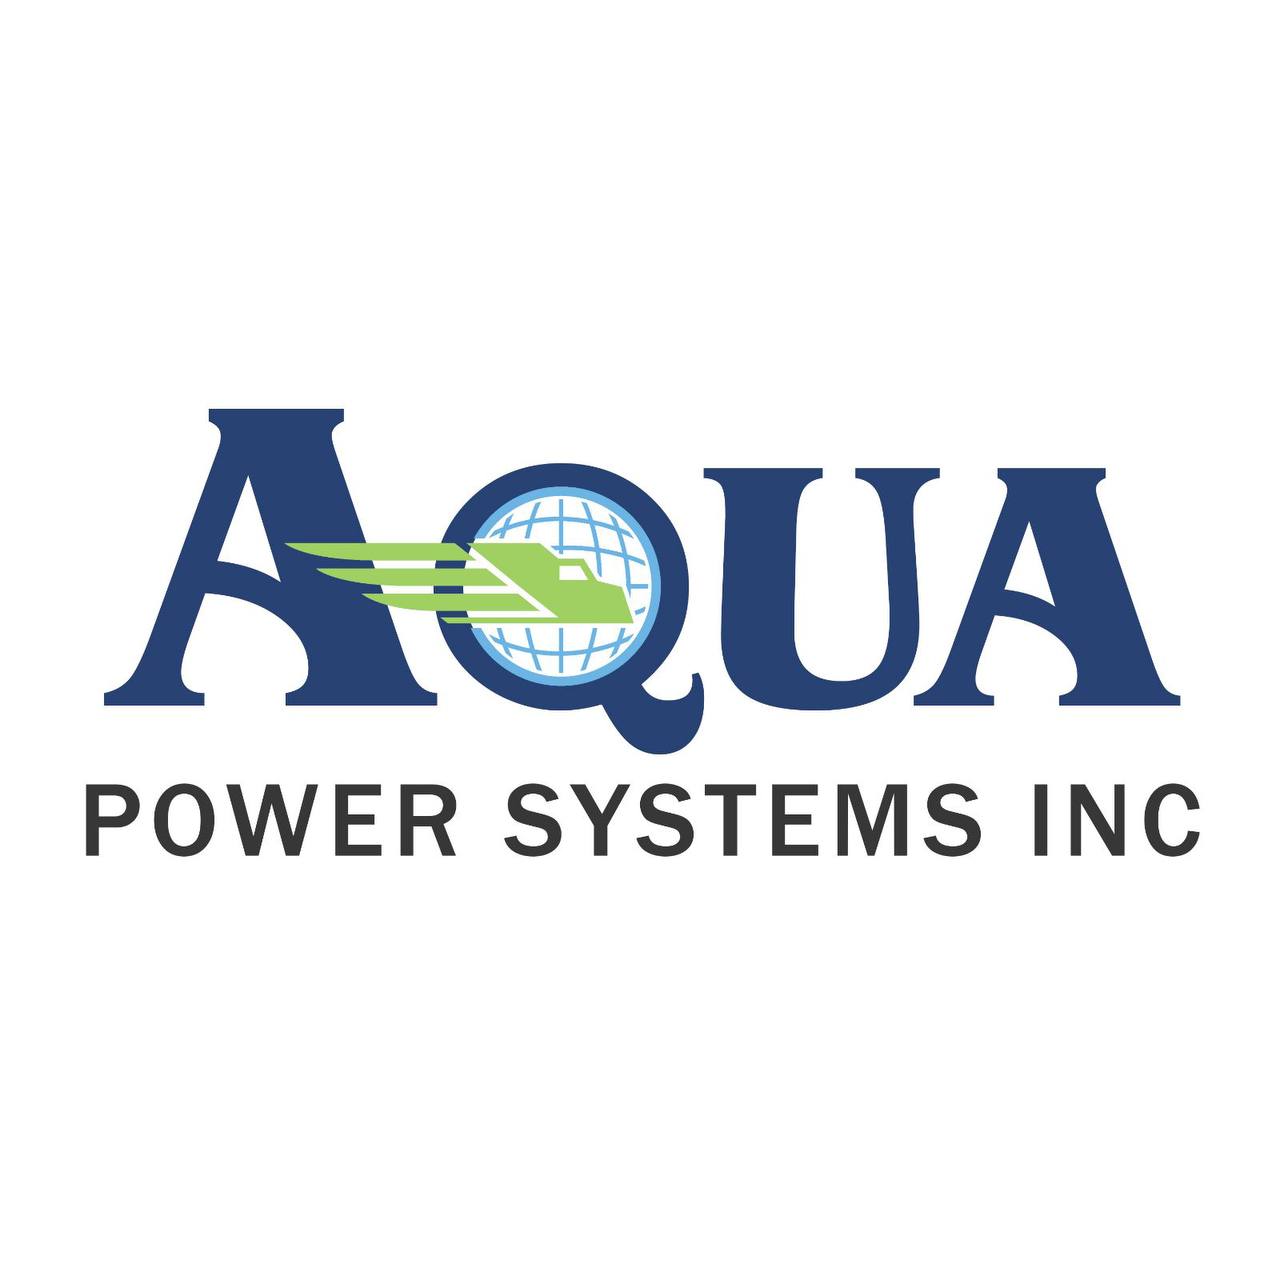 Aqua Power Systems, Inc., Tuesday, March 7, 2023, Press release picture